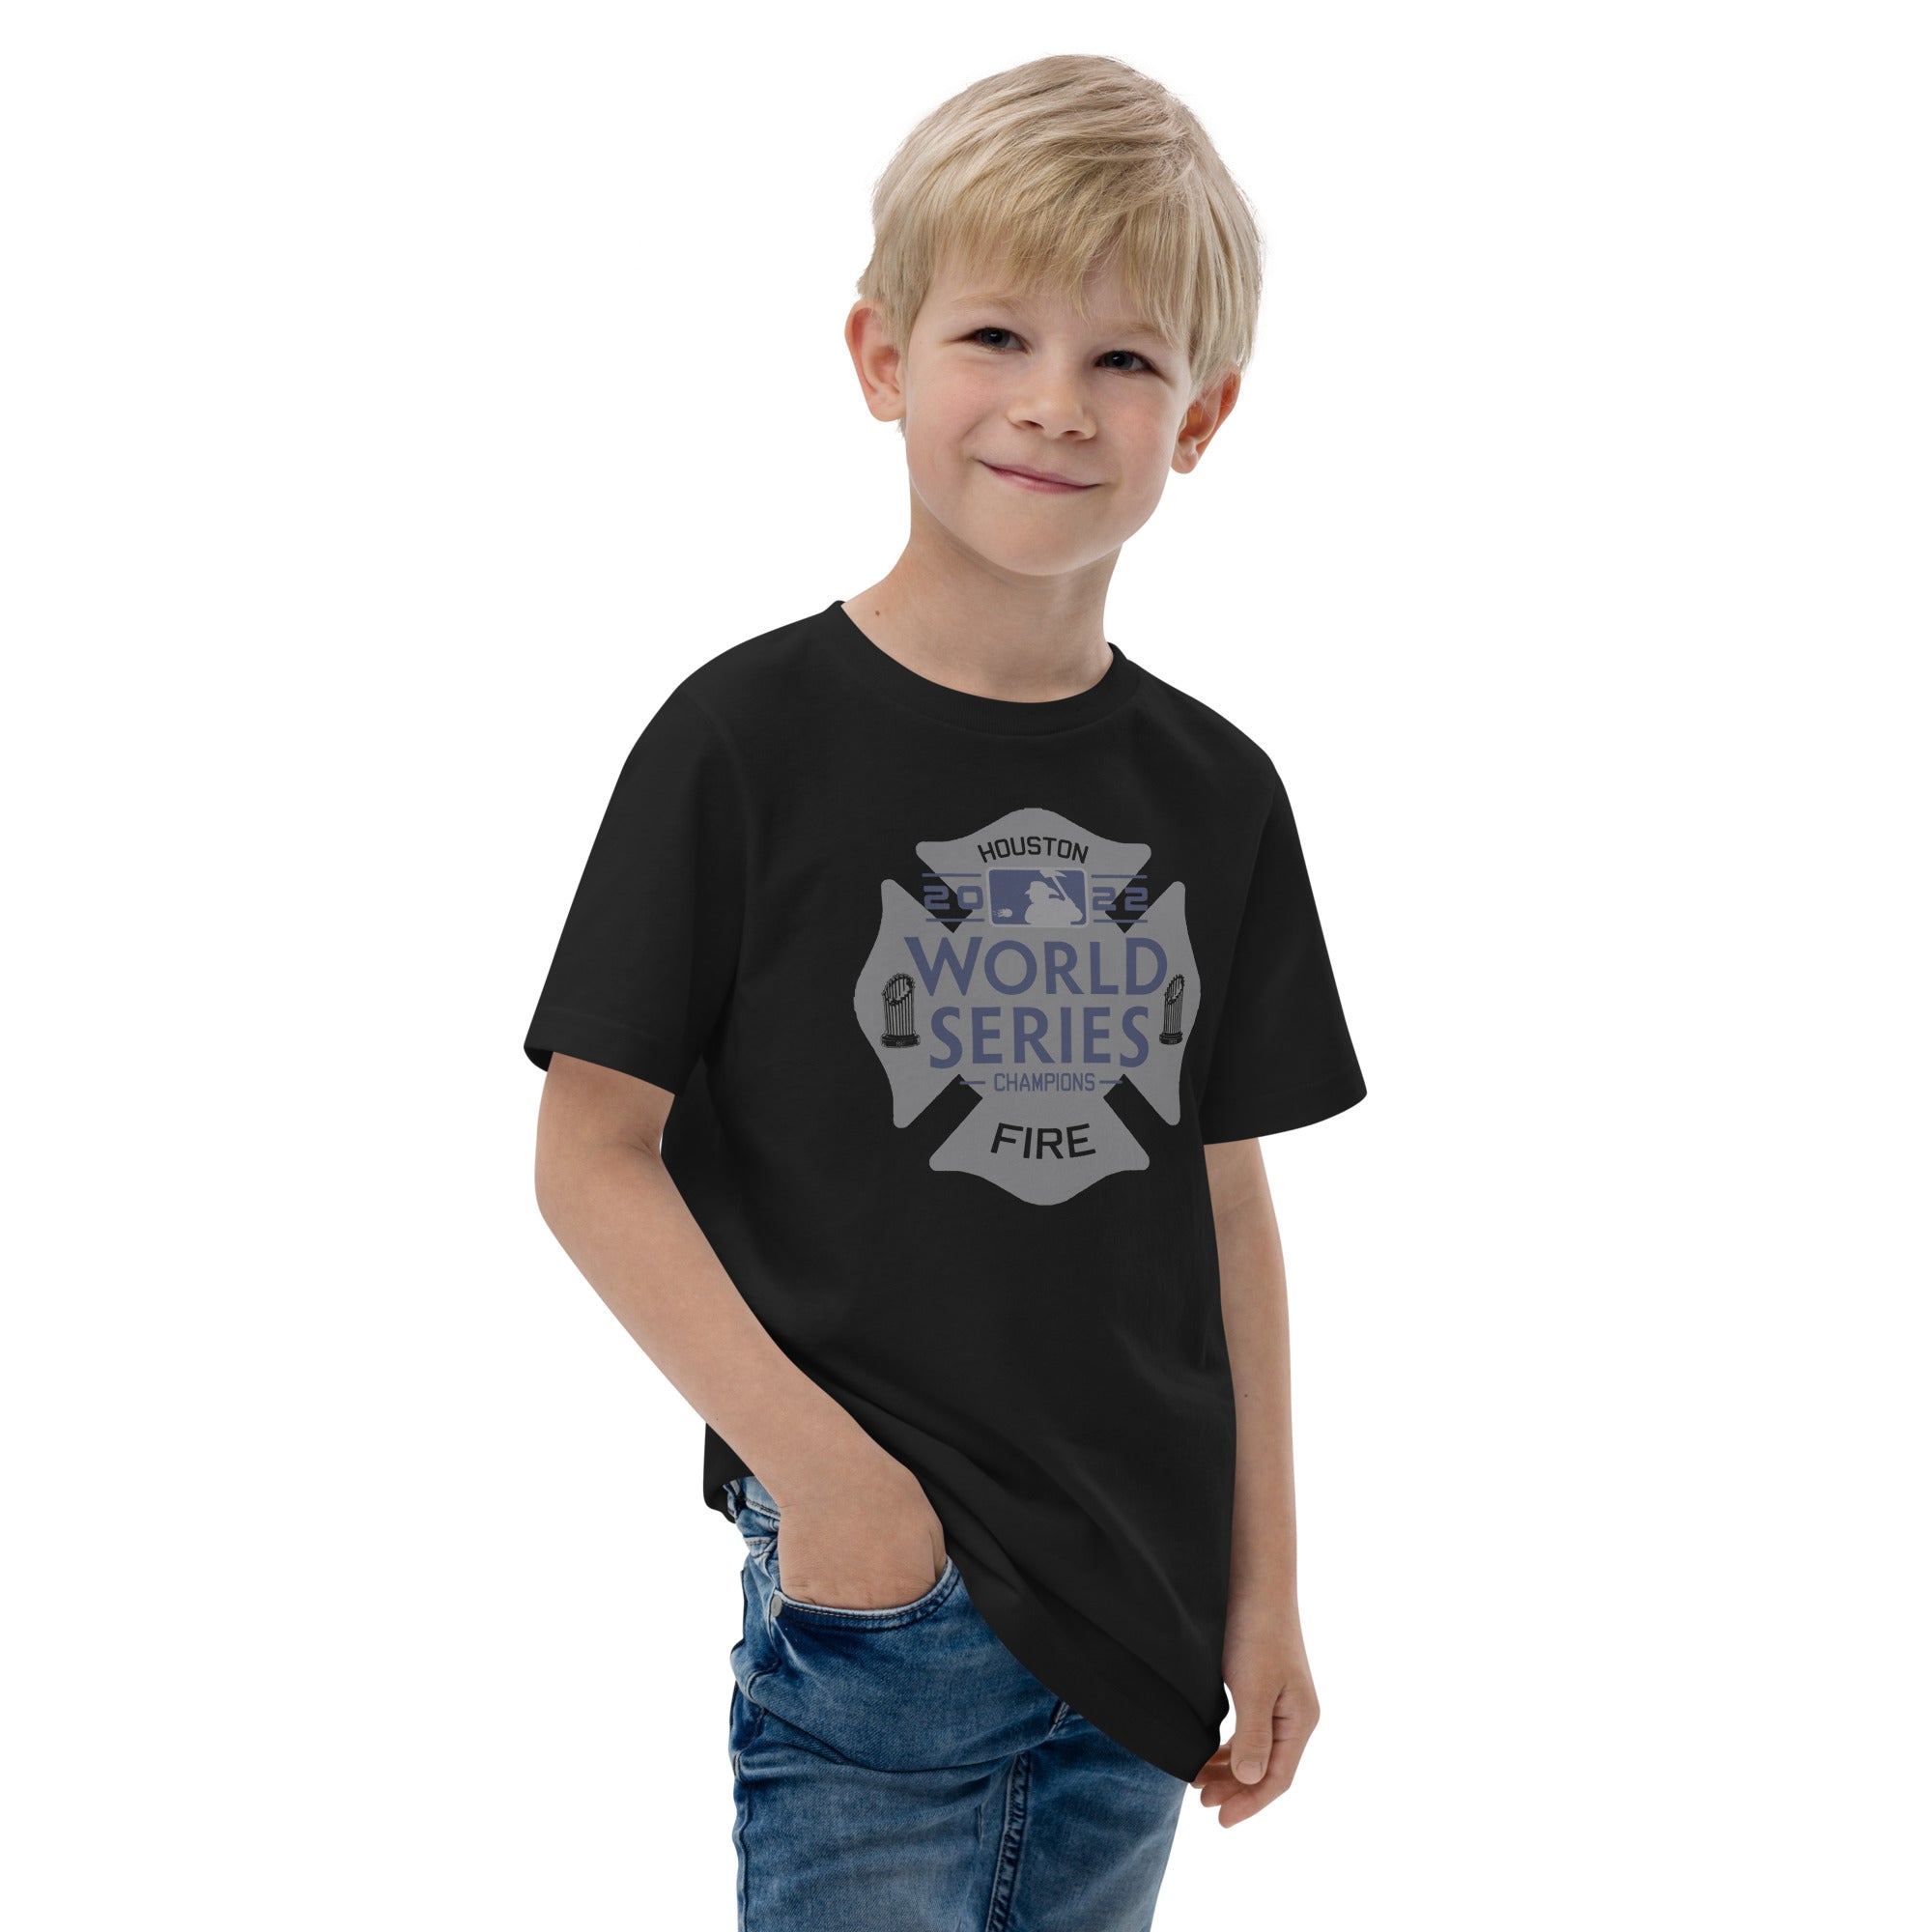 HOUSTON FIRE WORLD SERIES THEMED HFD Youth jersey t-shirt – Houstonfire Shop